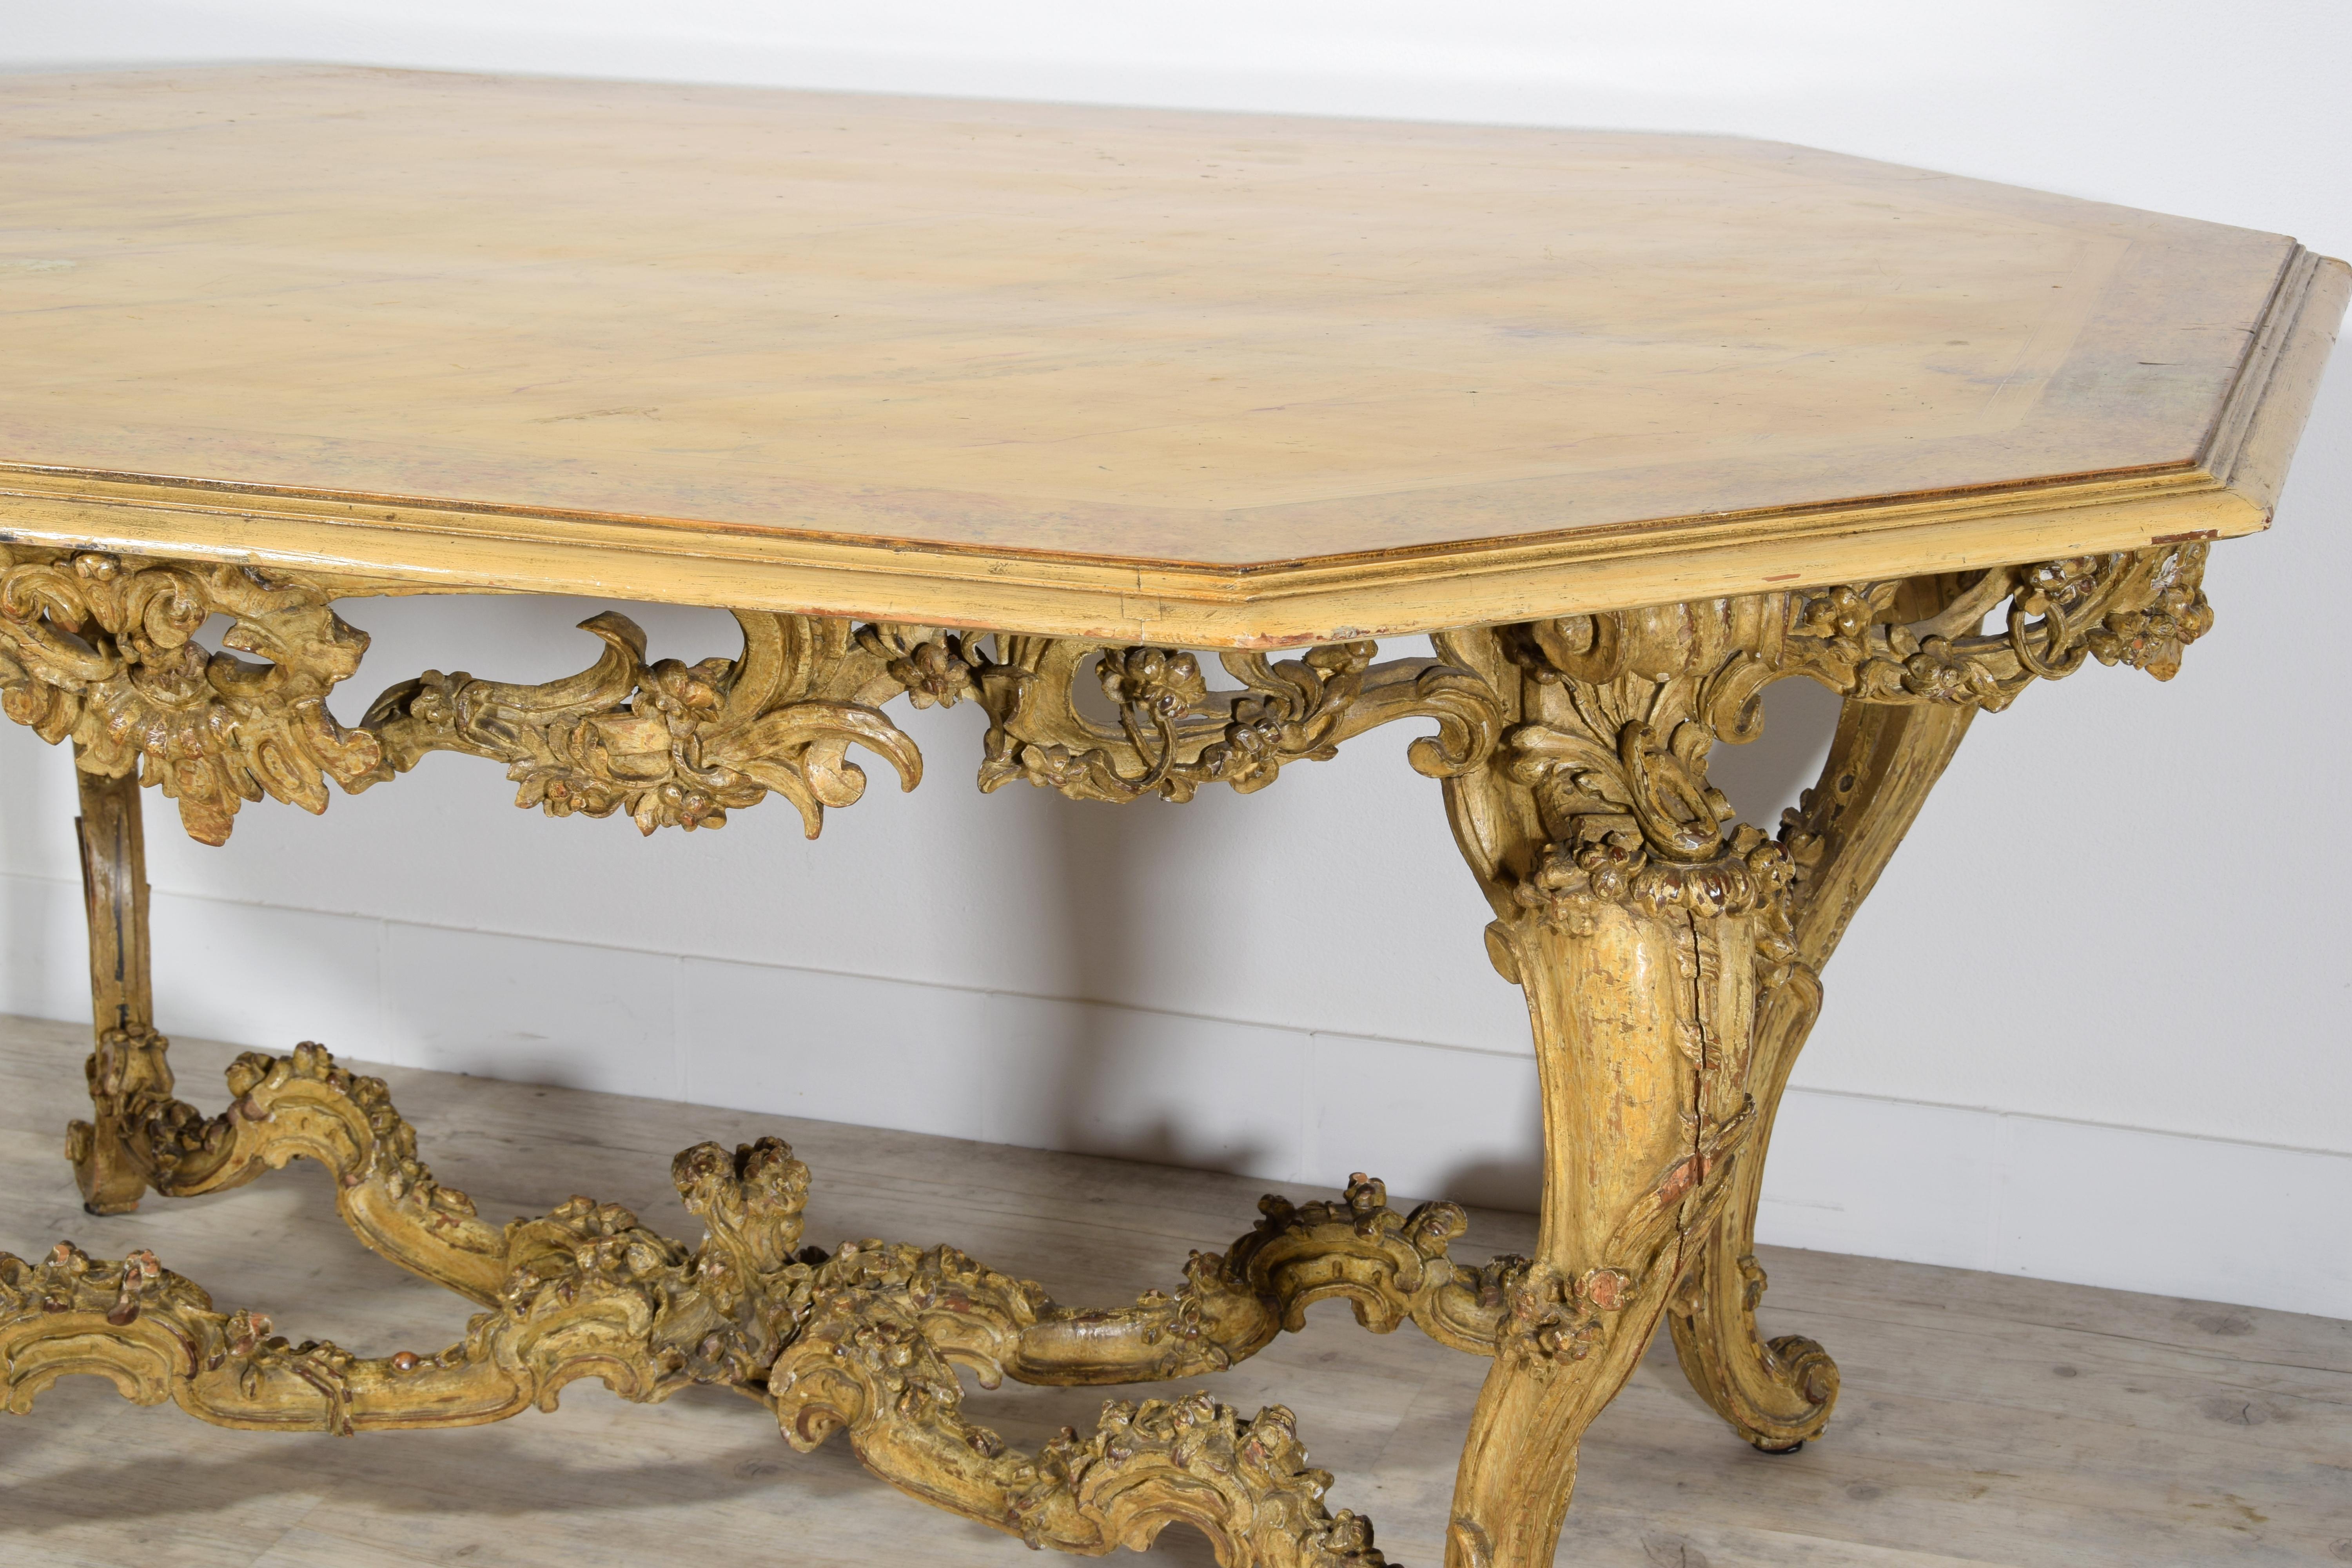 Italian Baroque Carved Gilt and Lacquered Wood Center Table, 18th Century For Sale 10